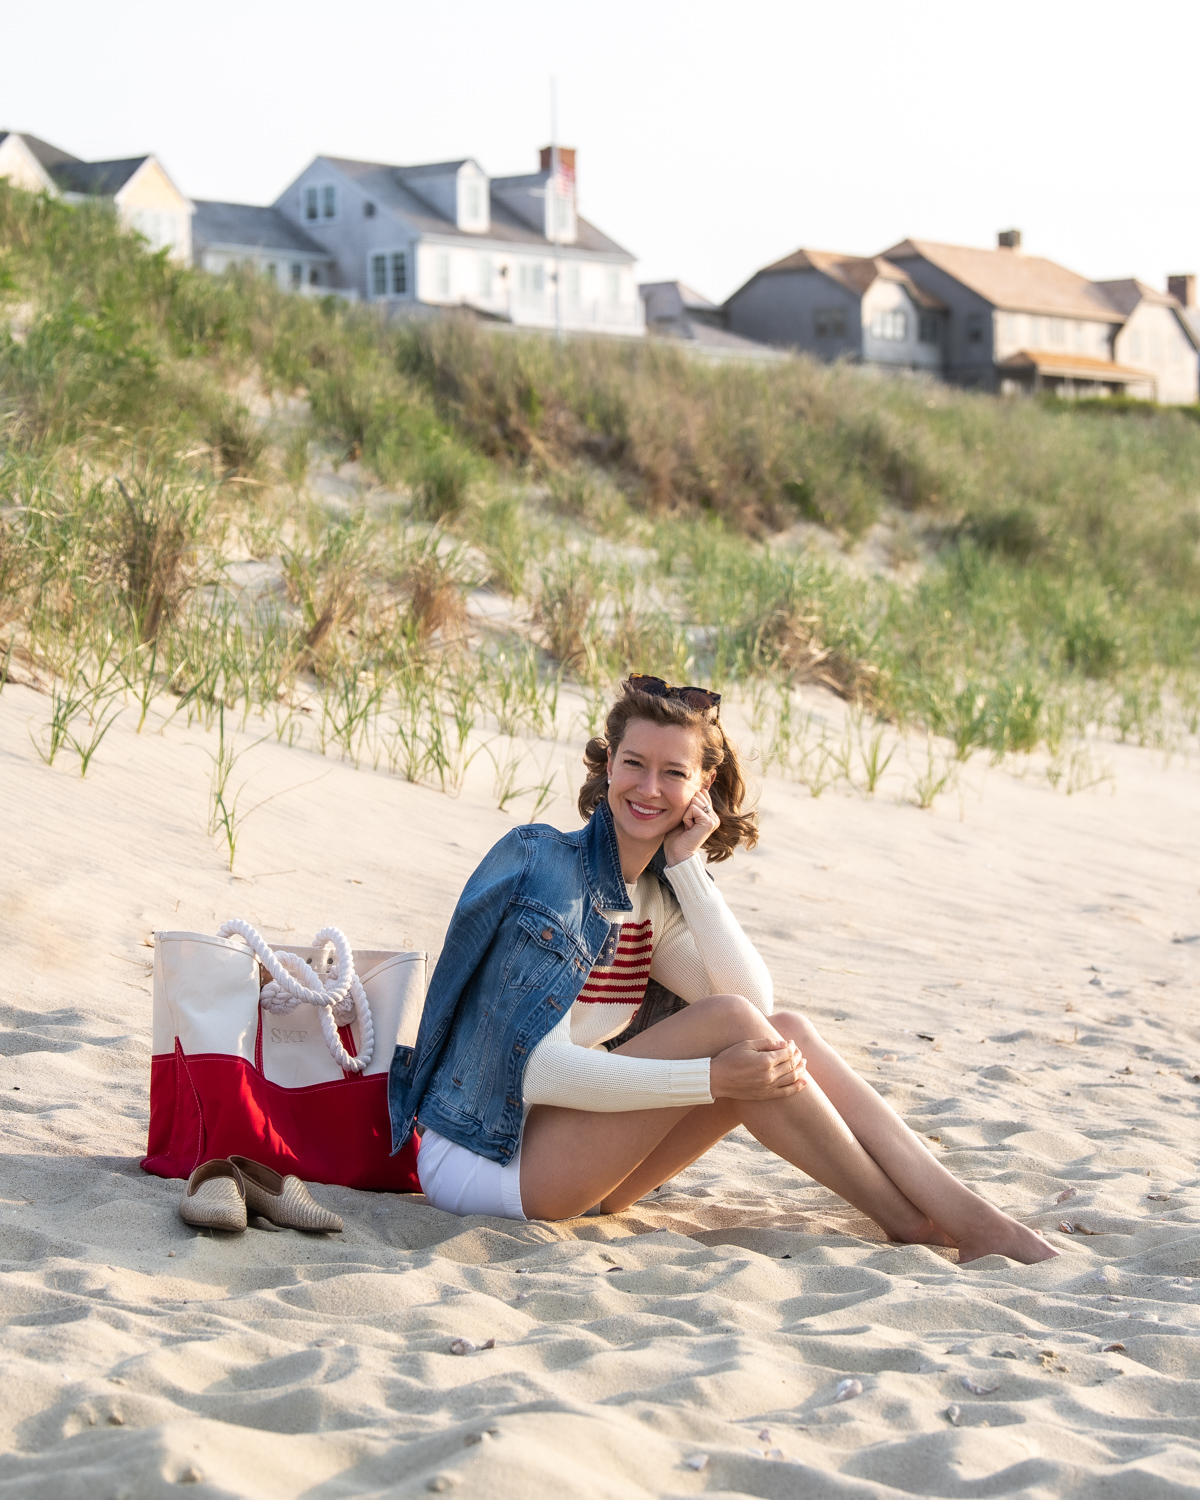 Shop Maine New England Women's Chinos up to 70% Off | DealDoodle